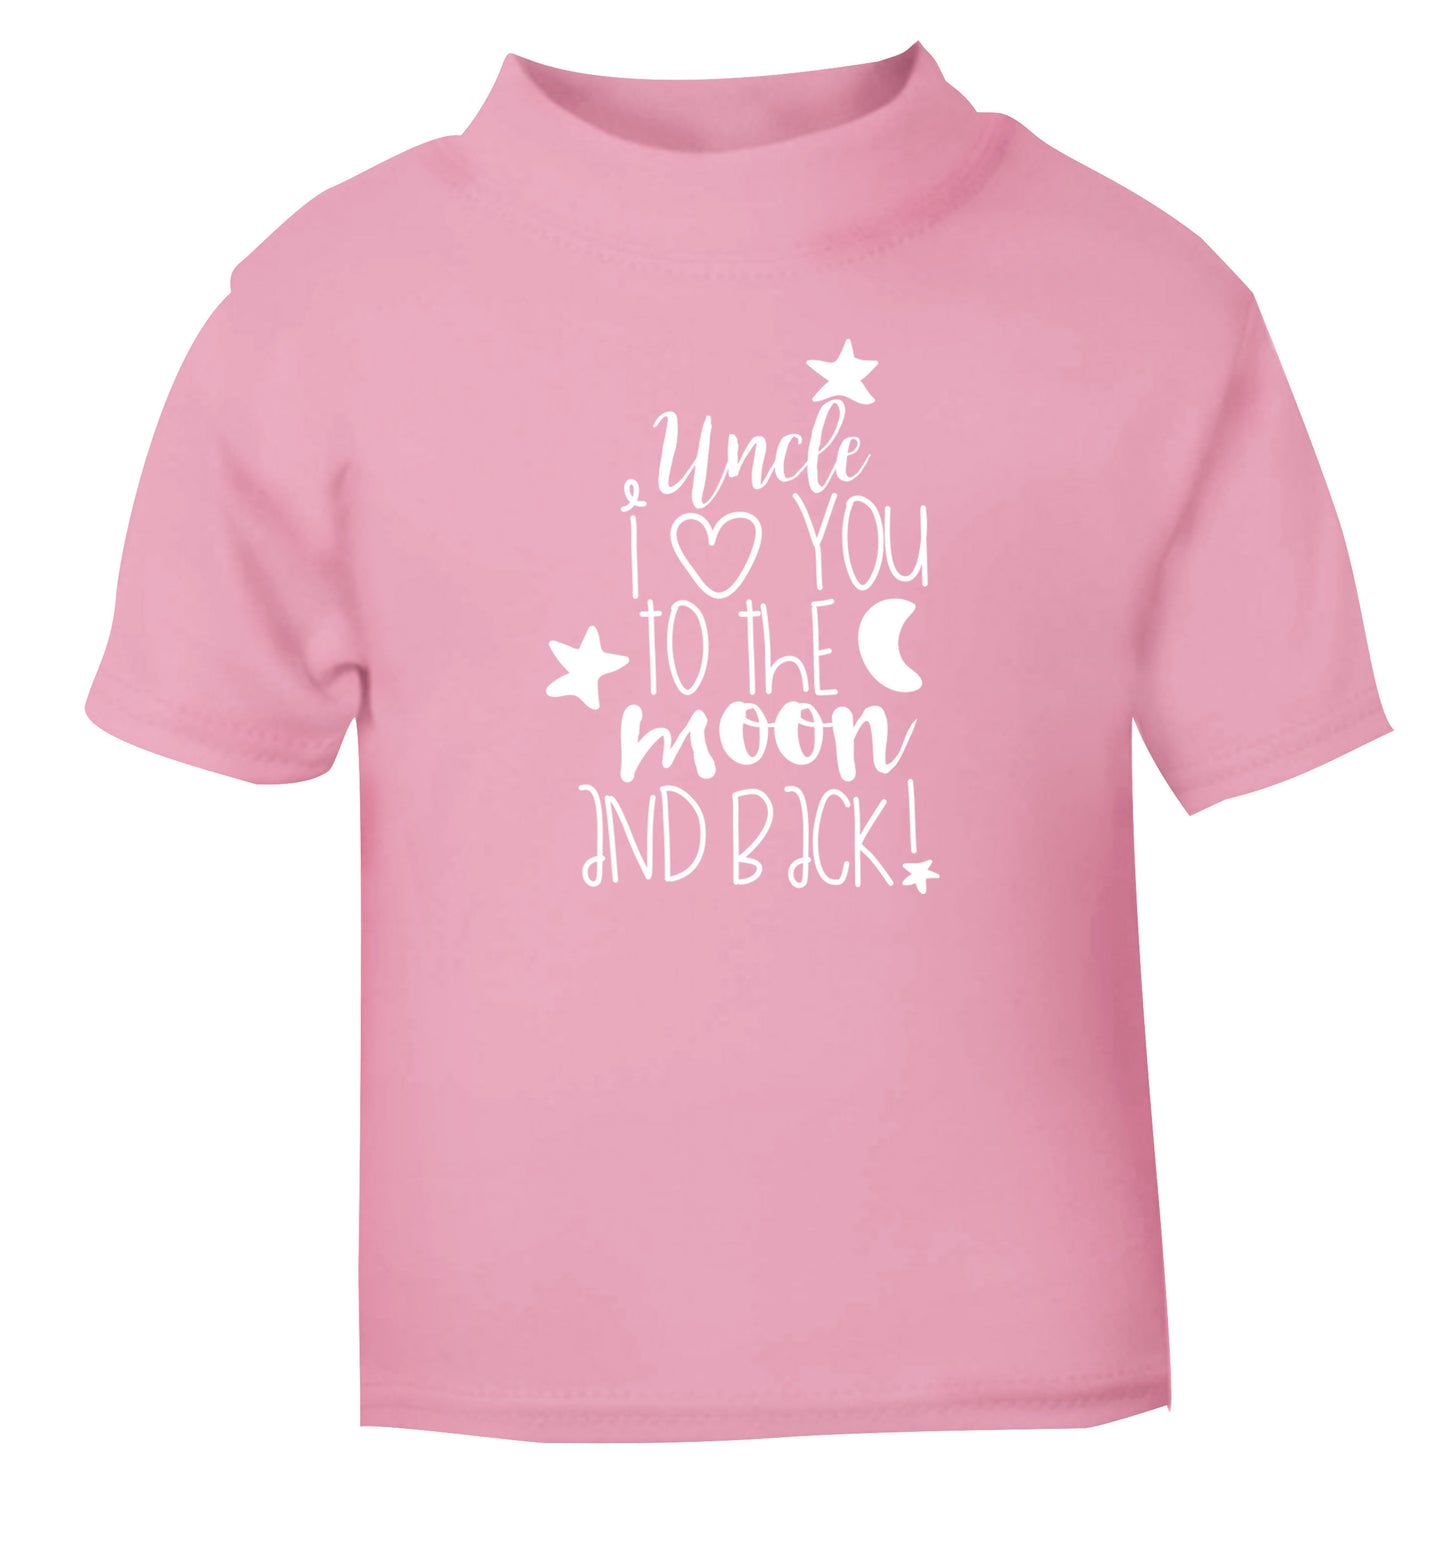 Uncle I love you to the moon and back light pink Baby Toddler Tshirt 2 Years